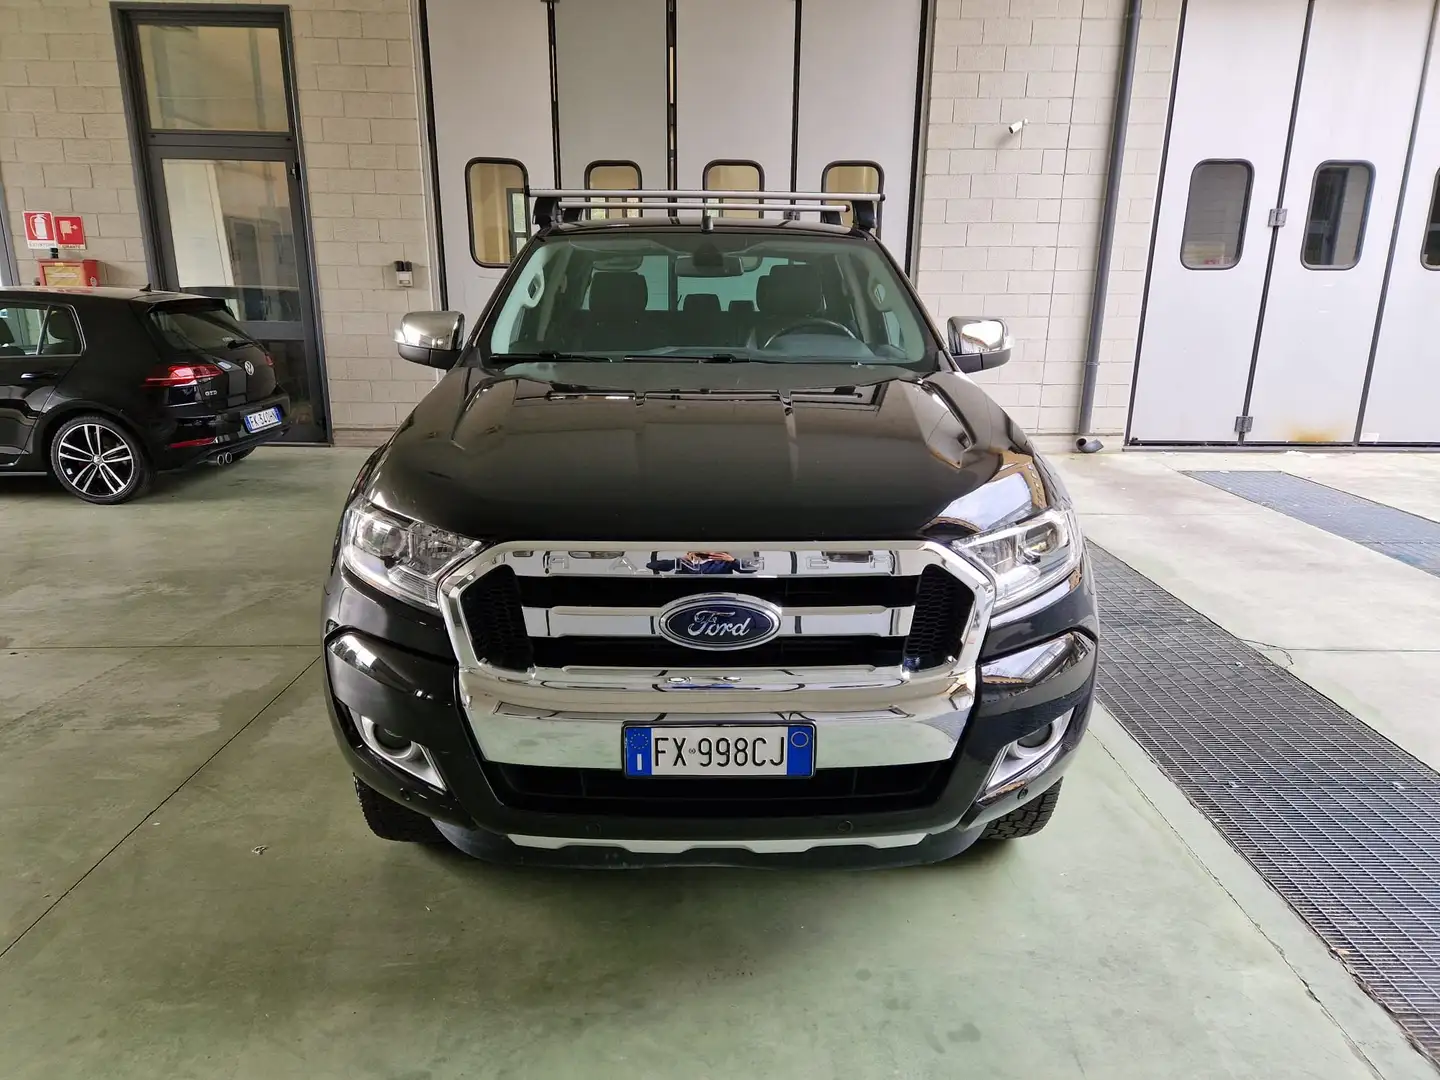 Ford Ranger 2.2 tdci double cab Limited 160cv auto (IVA) - 2